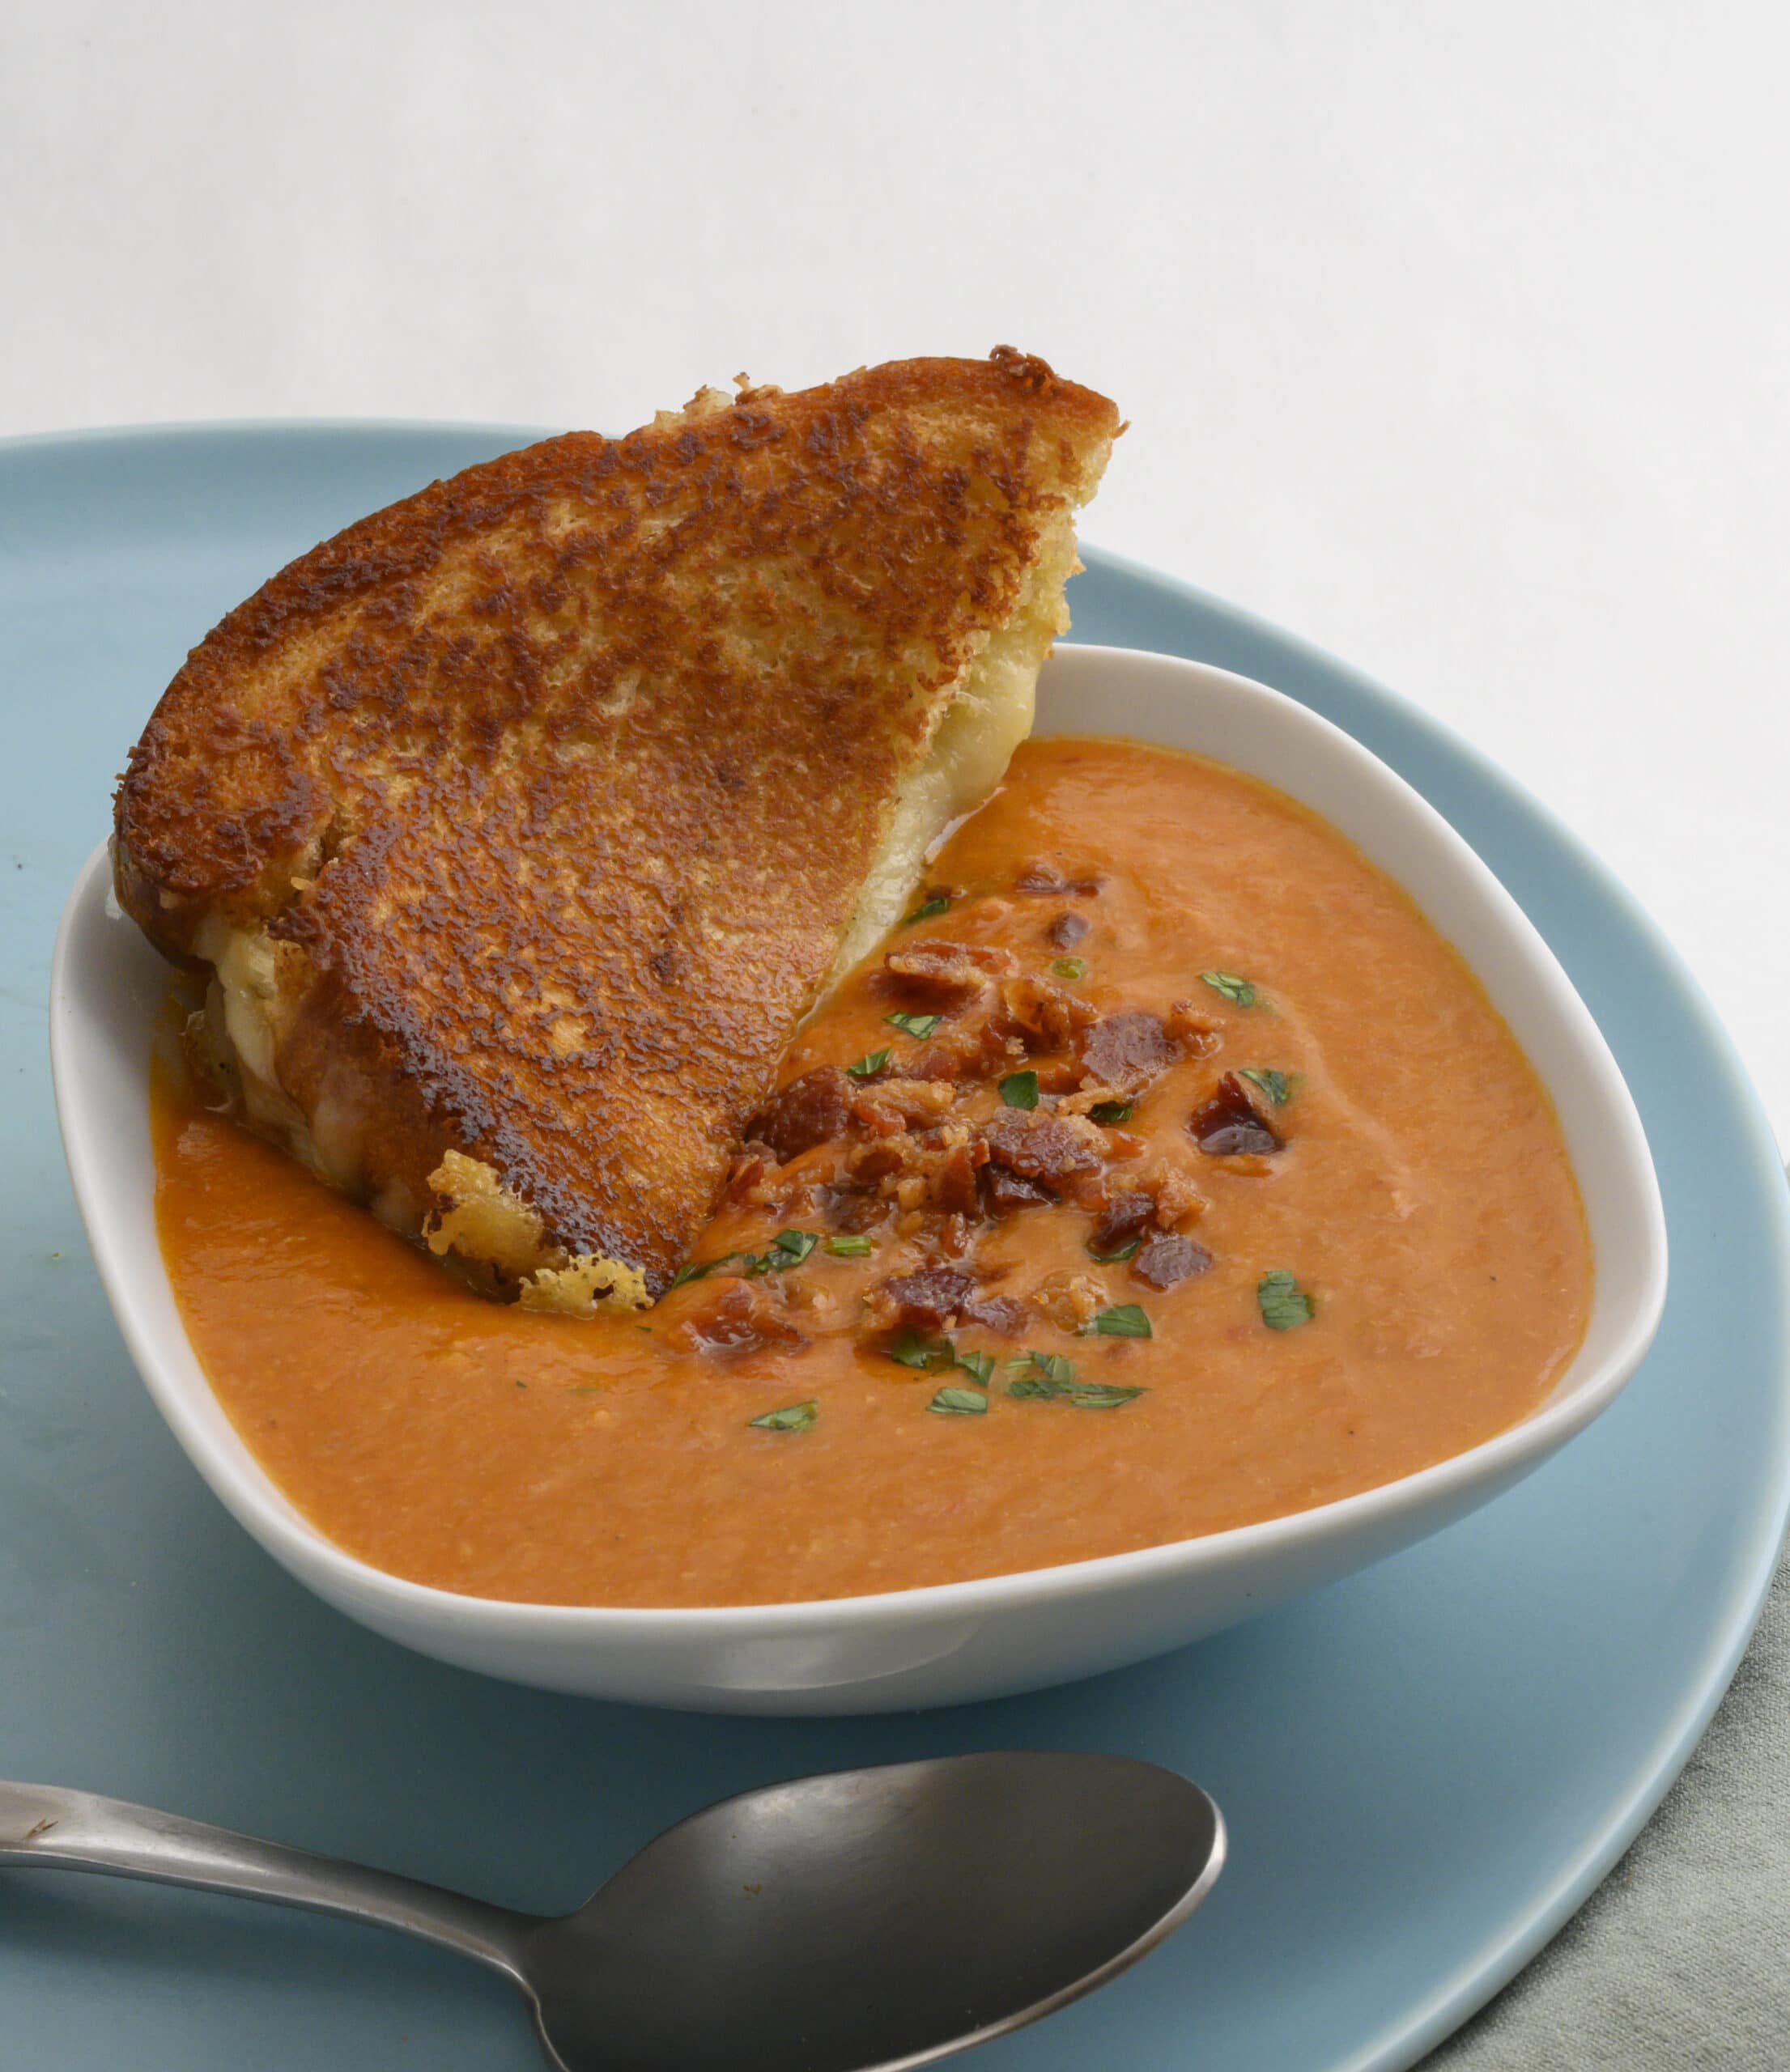 Gastronaut Bob Blumer’s Cream of Nostalgia Soup with Bacon & Grilled Cheese